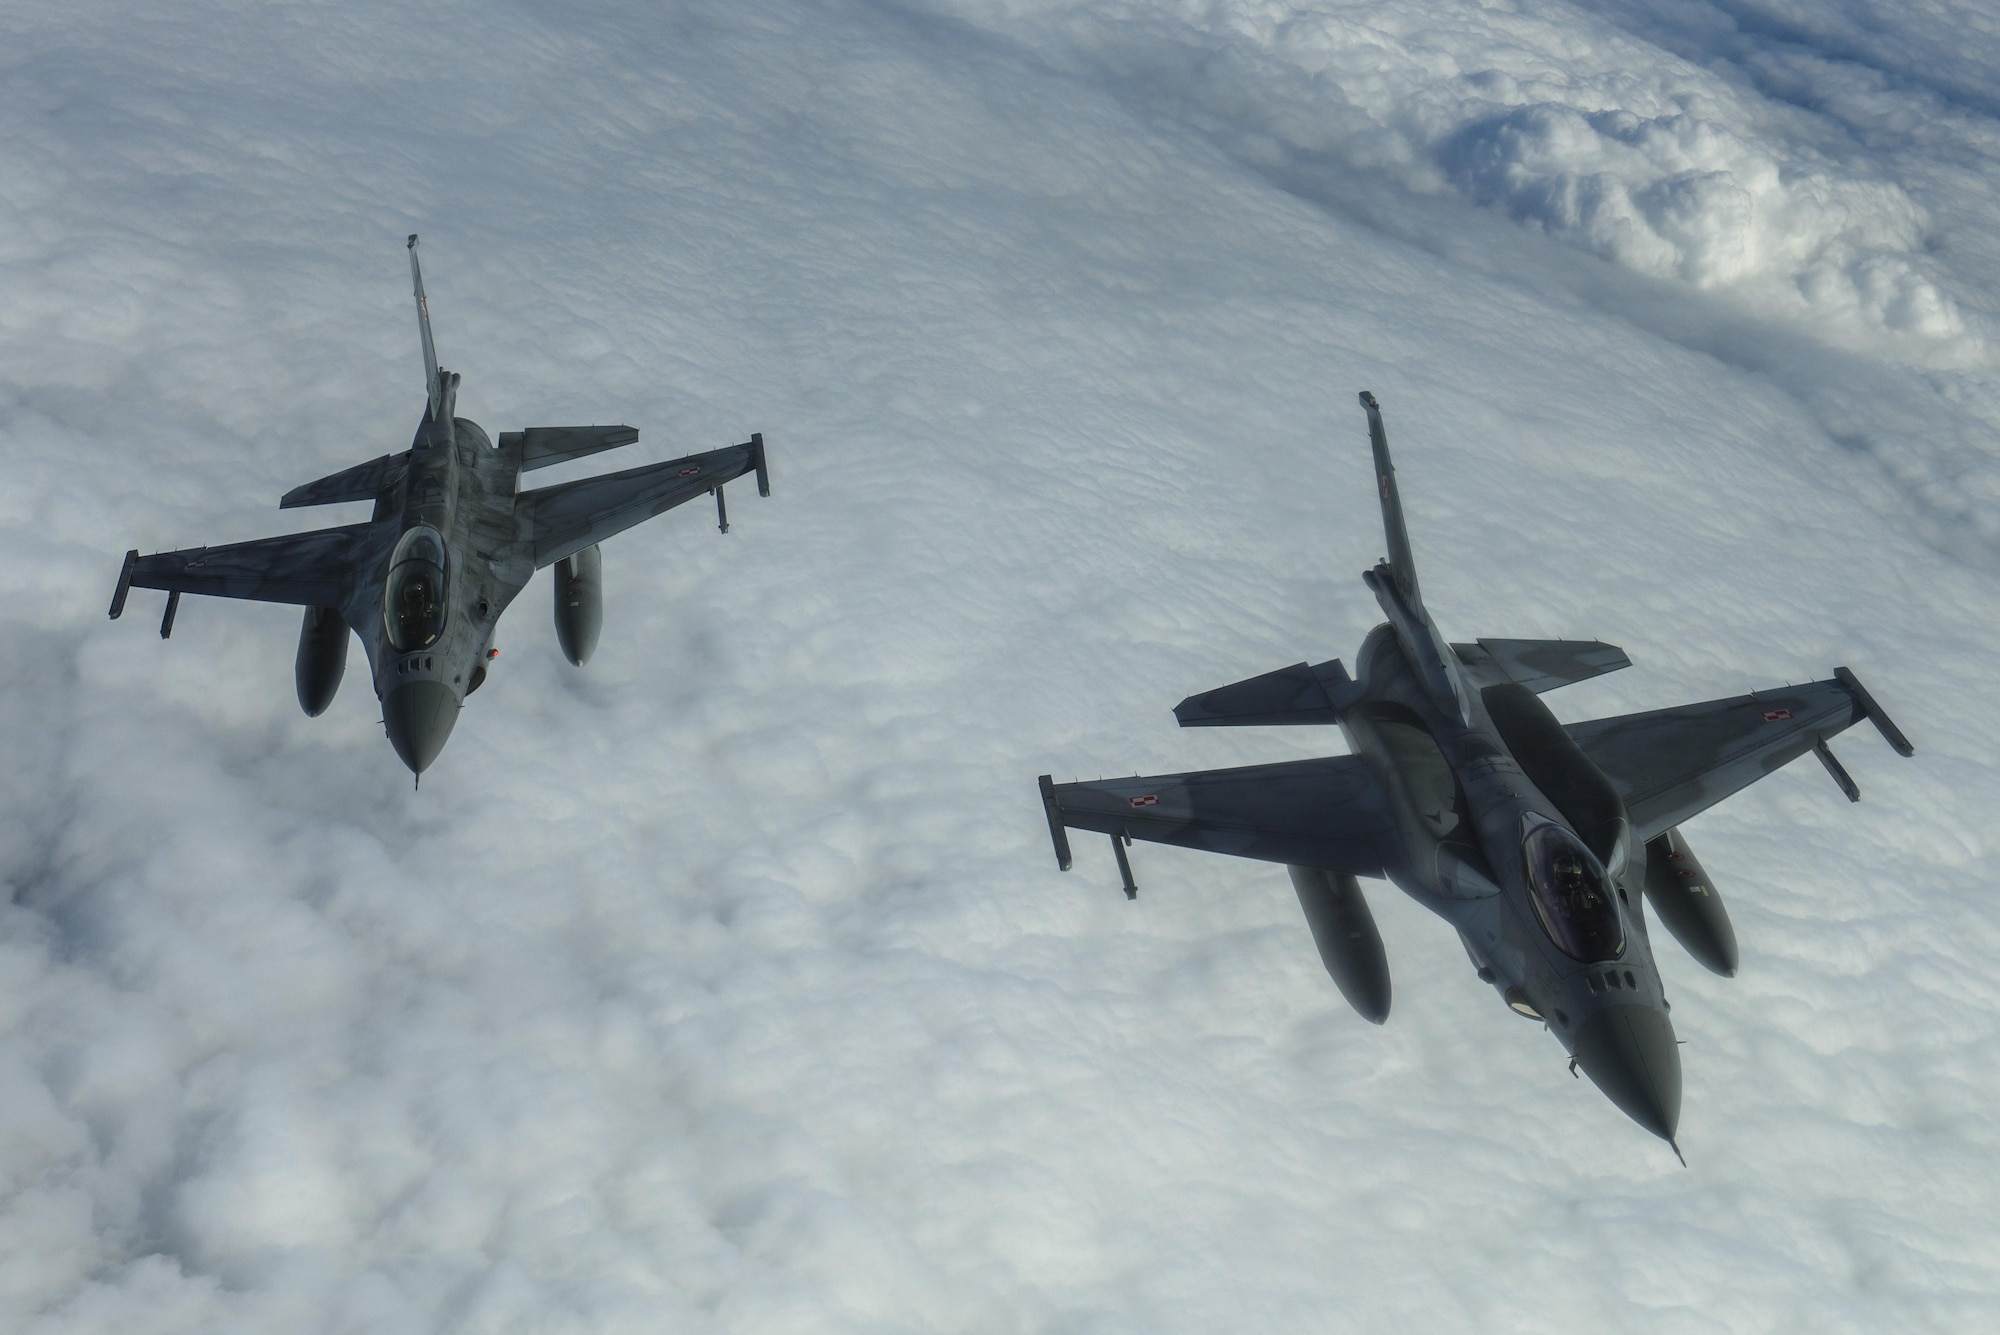 Polish air force F-16 Fighting Falcons fly in a two ship formation during BALTOPS over the Baltic Sea, June 13, 2017. BALTOPS is an annually recurring multinational exercise designed to enhance flexibility and interoperability, as well as demonstrate resolve of allied and partner forces to defend the Baltic region. Participating nations include Belgium, Denmark, Estonia, Finland, France, Germany, Latvia, Lithuania, the Netherlands, Norway, Poland, Sweden, the United Kingdom, and the United States. (U.S. Air Force photo by Staff Sgt. Jonathan Snyder)